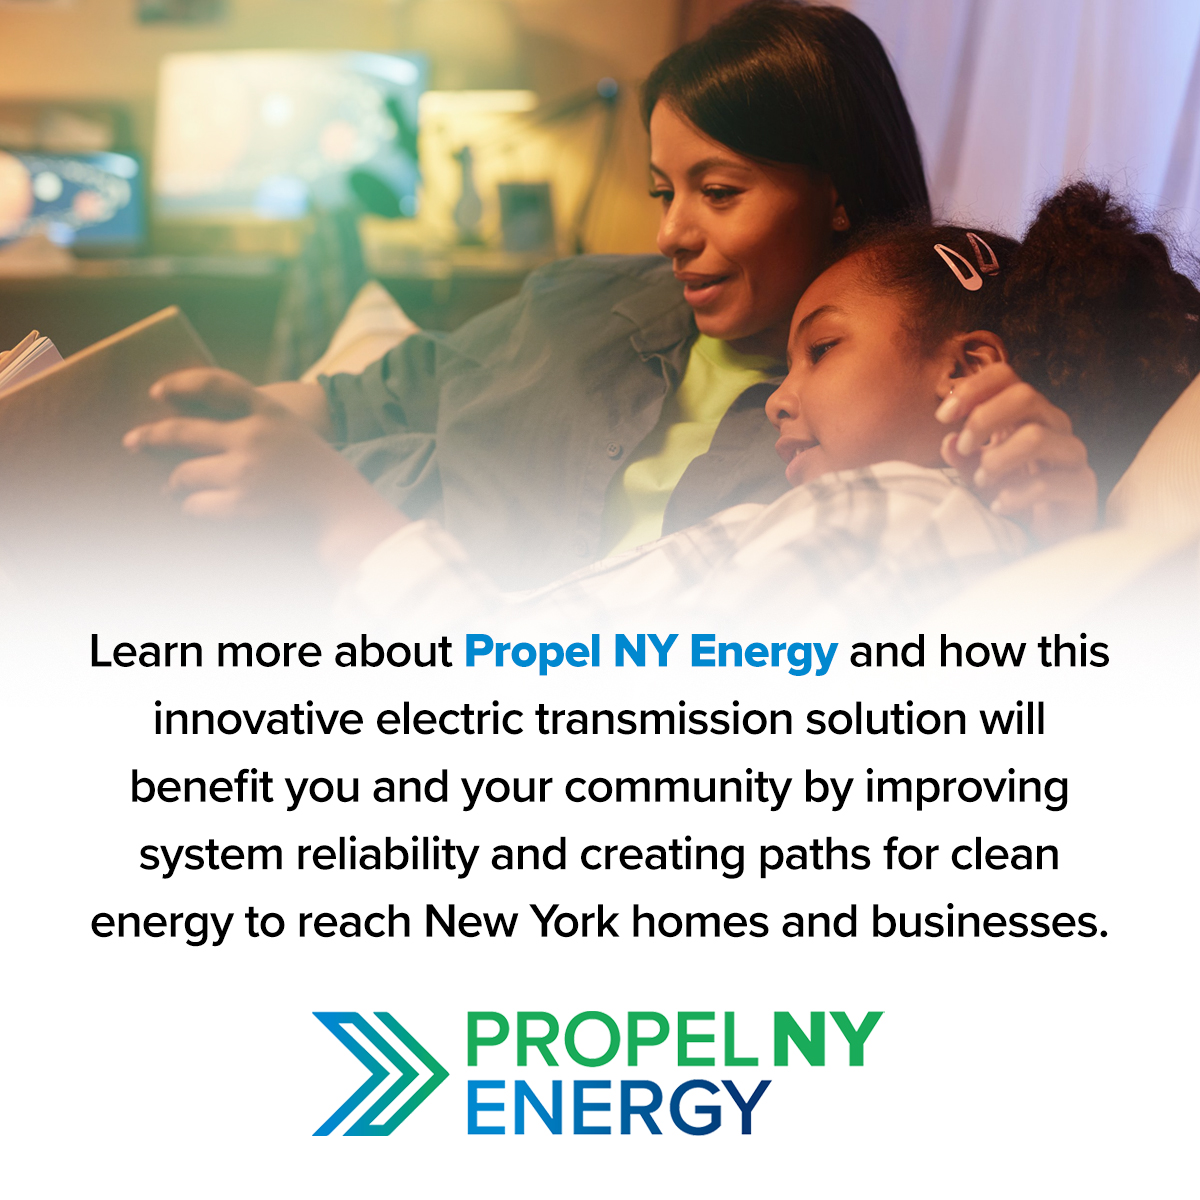 Nassau County residents, join an upcoming open house to learn about the Propel NY Energy electric transmission project. To register for in-person or a virtual meeting, go to: propelnyenergy.com/neighbors #PropelNYEnergy